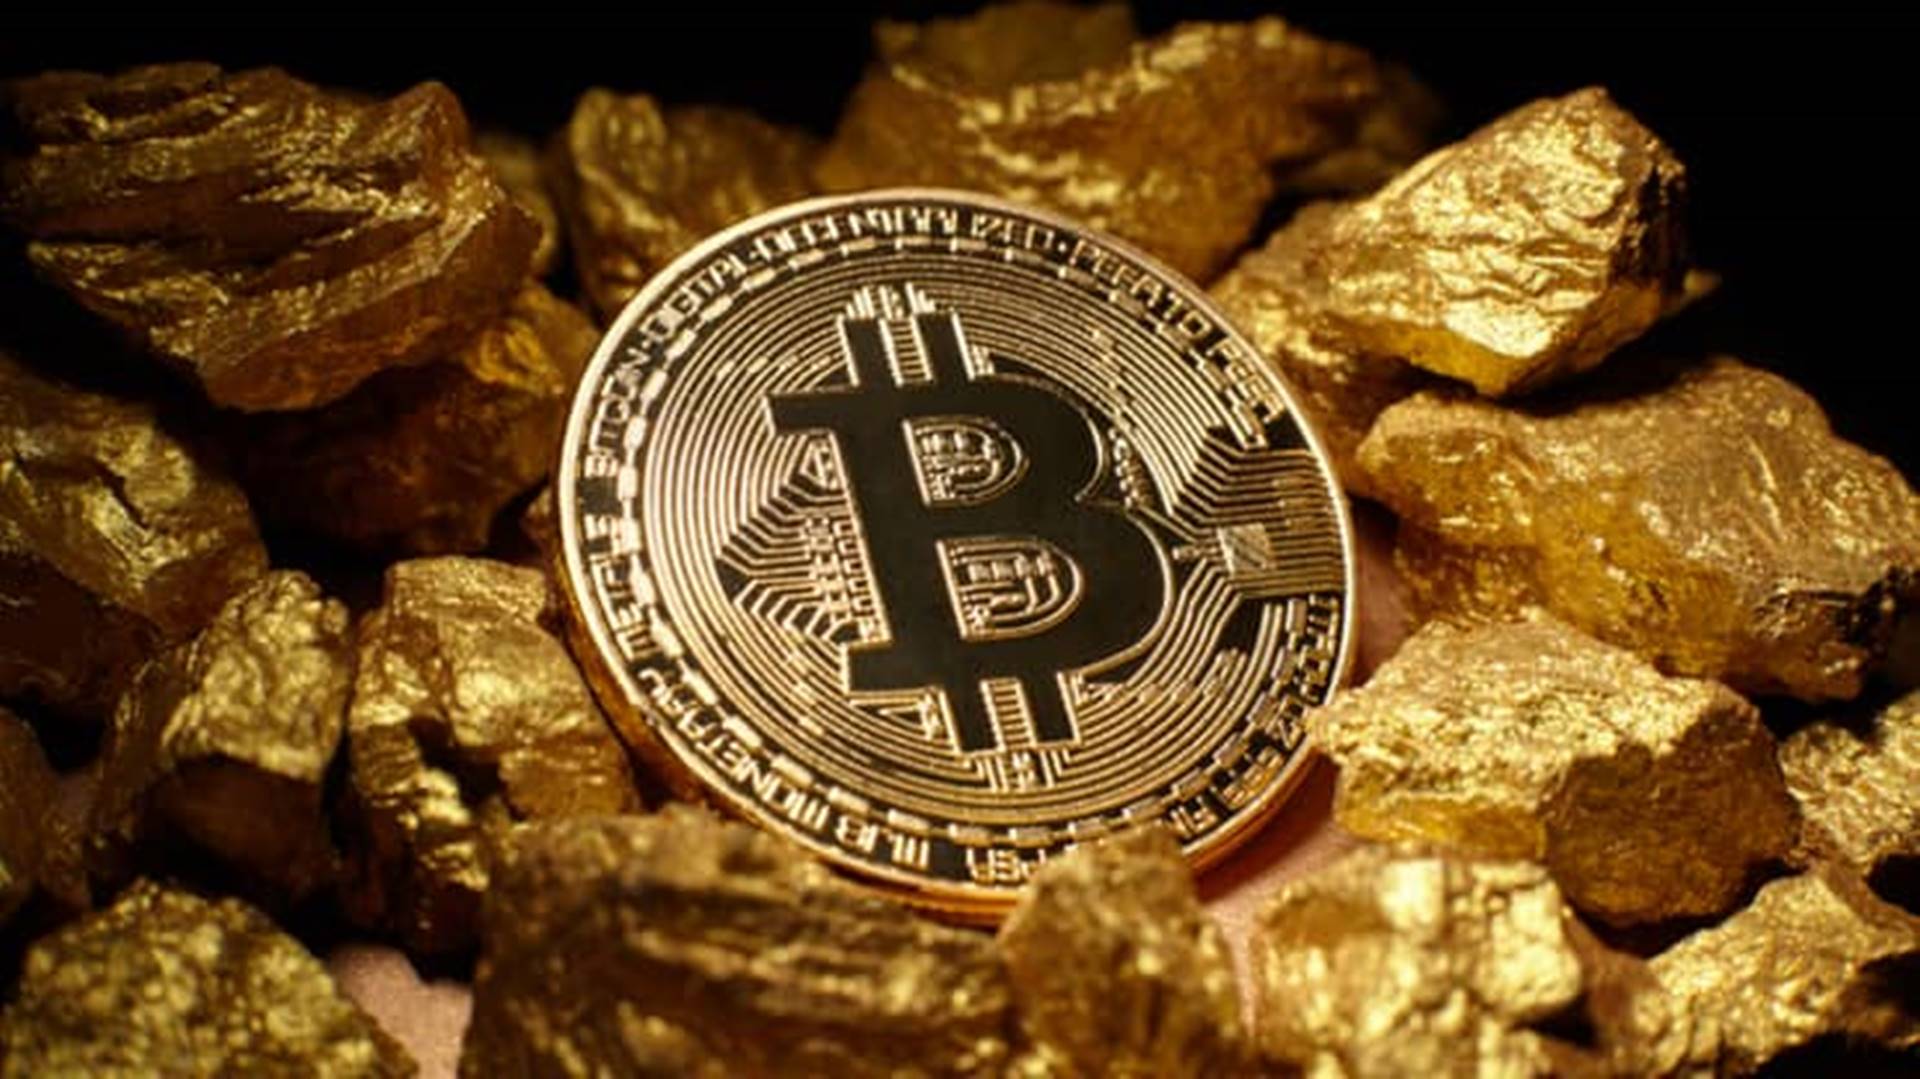 SocGen says bitcoin’s place in a portfolio ‘remains highly contested,’ gold is a better stabilizer